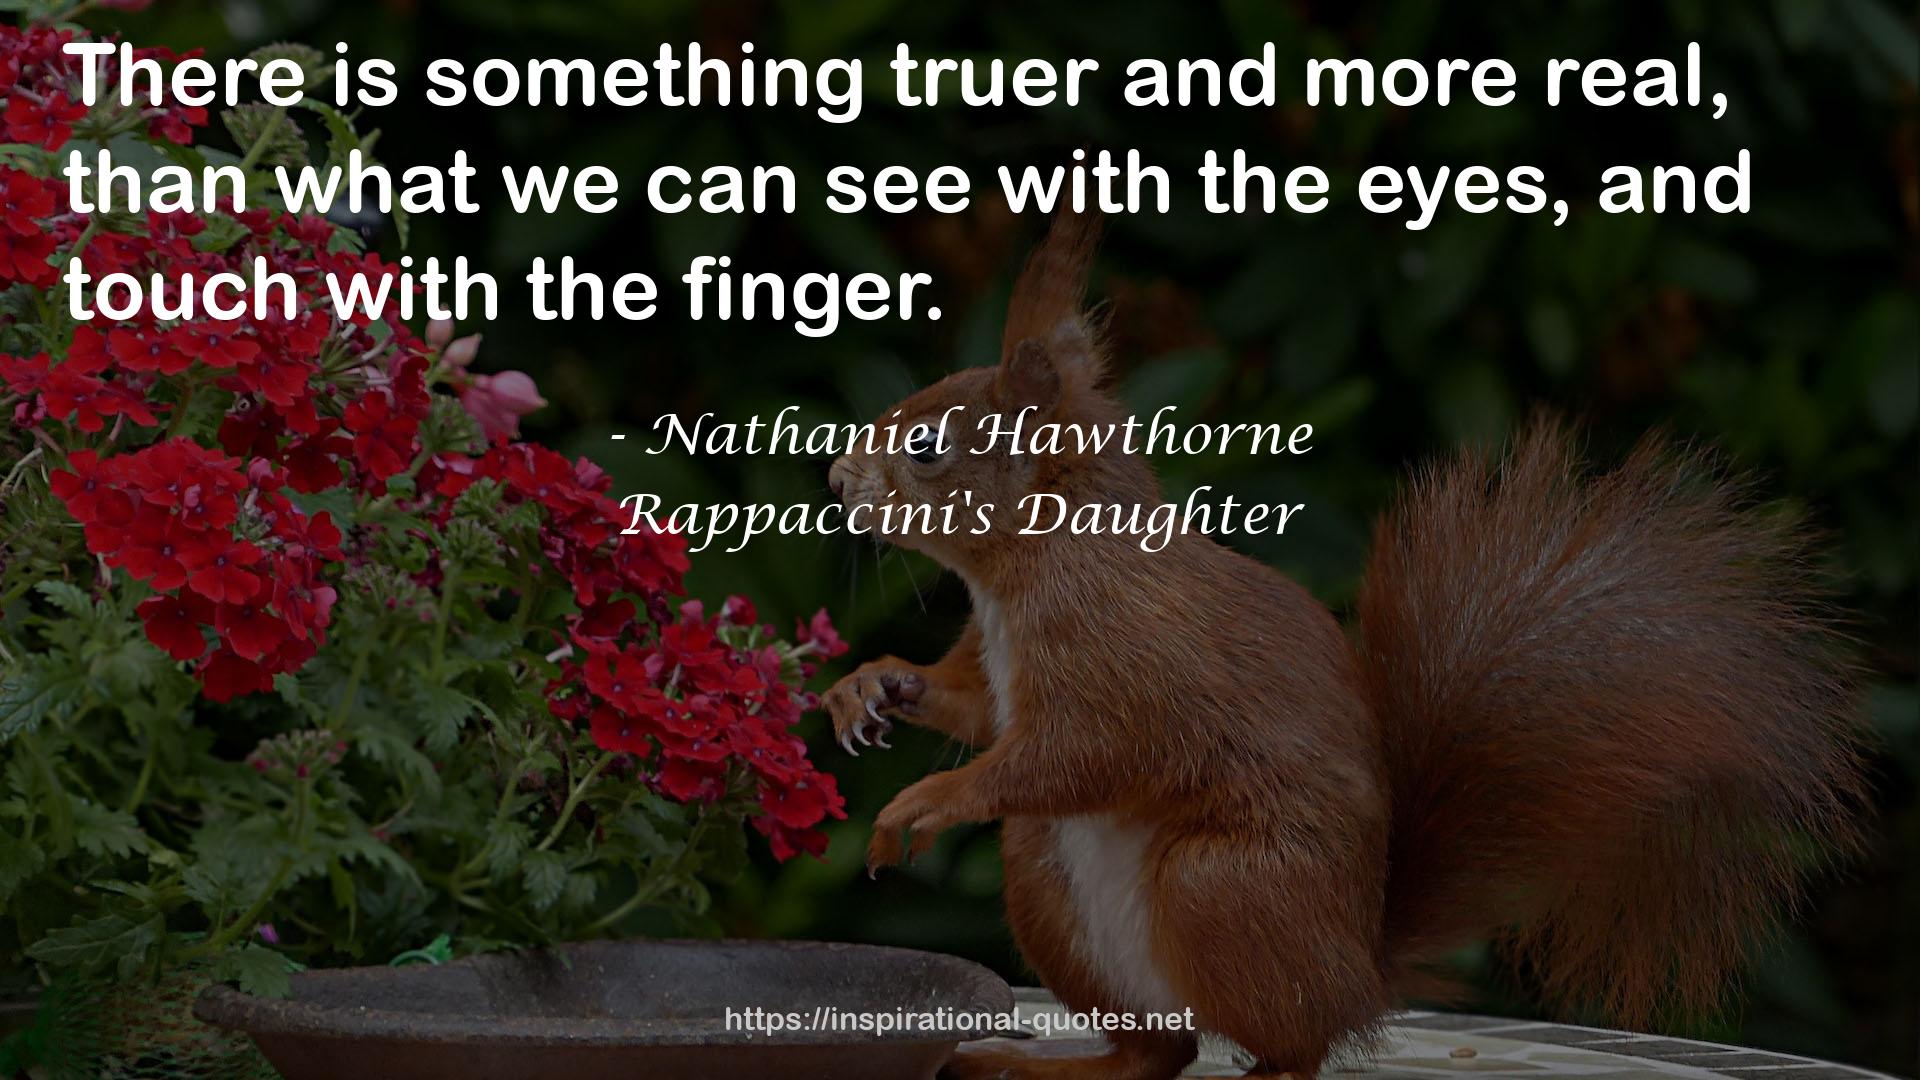 Rappaccini's Daughter QUOTES